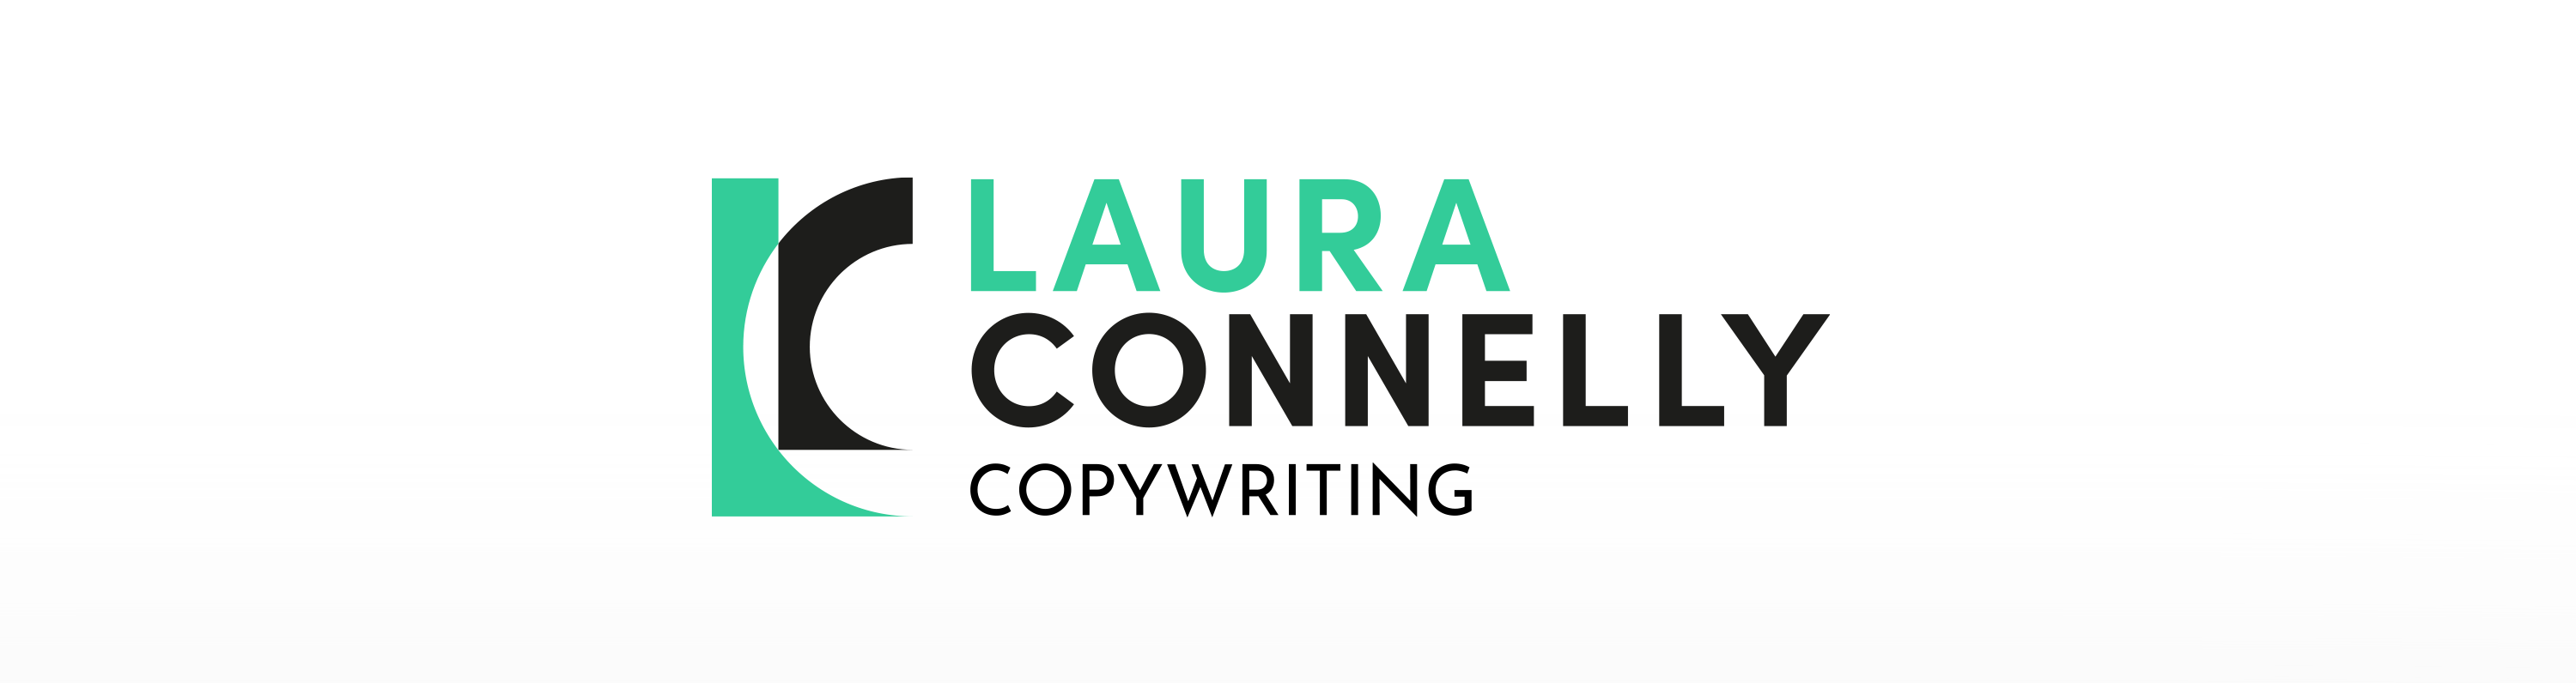 Logo created for Laura Connelly copywriting